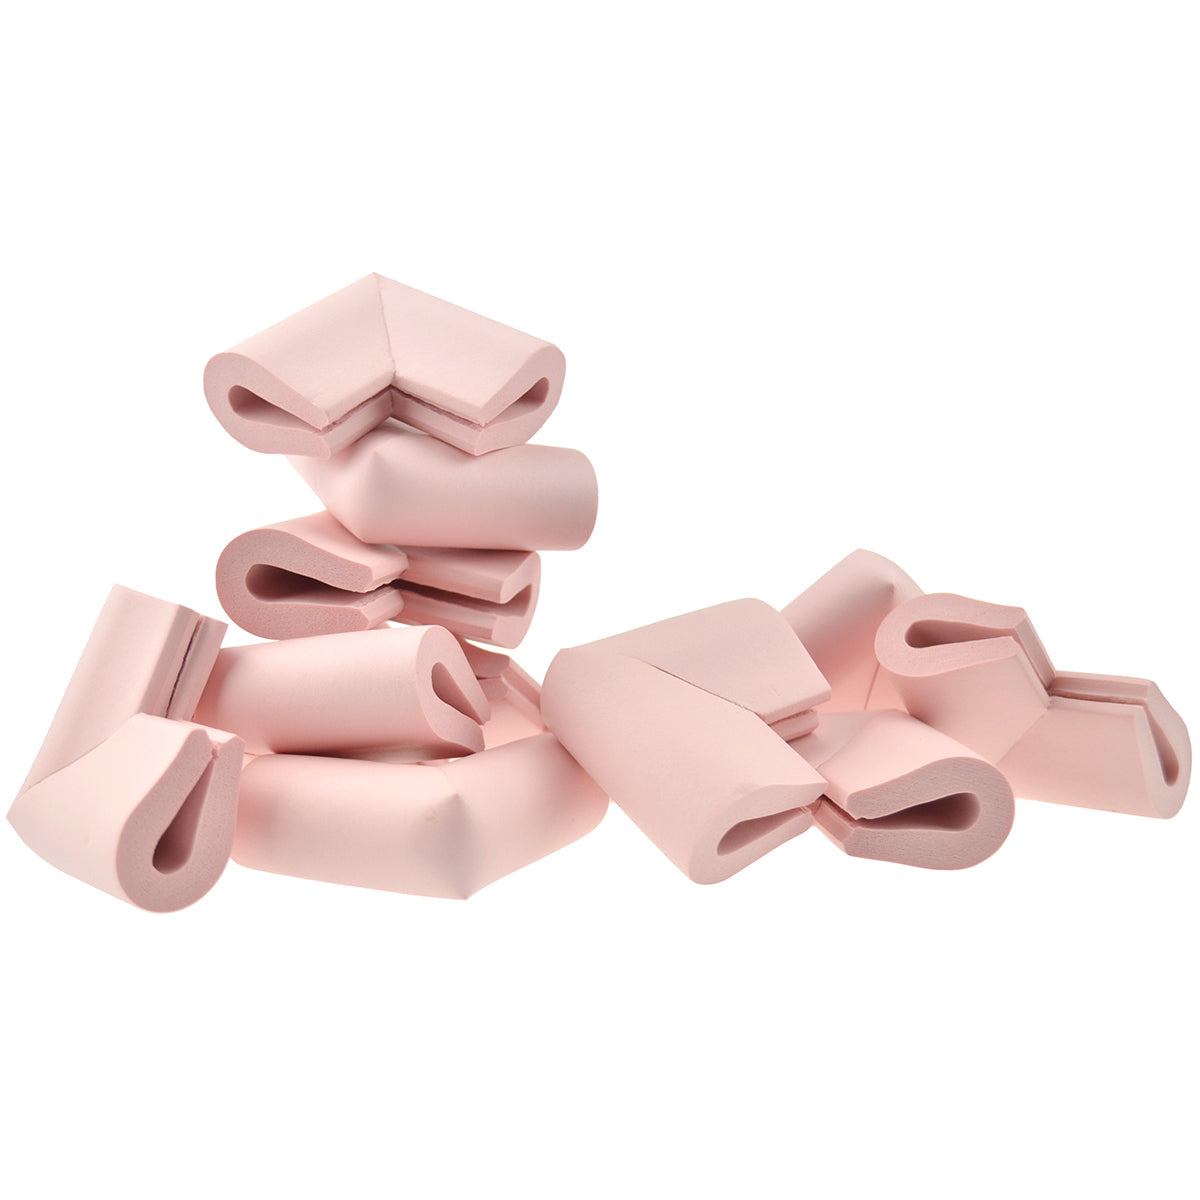 12 pieces randomly placed pink u-shaped foam corner protectors show with a white background.